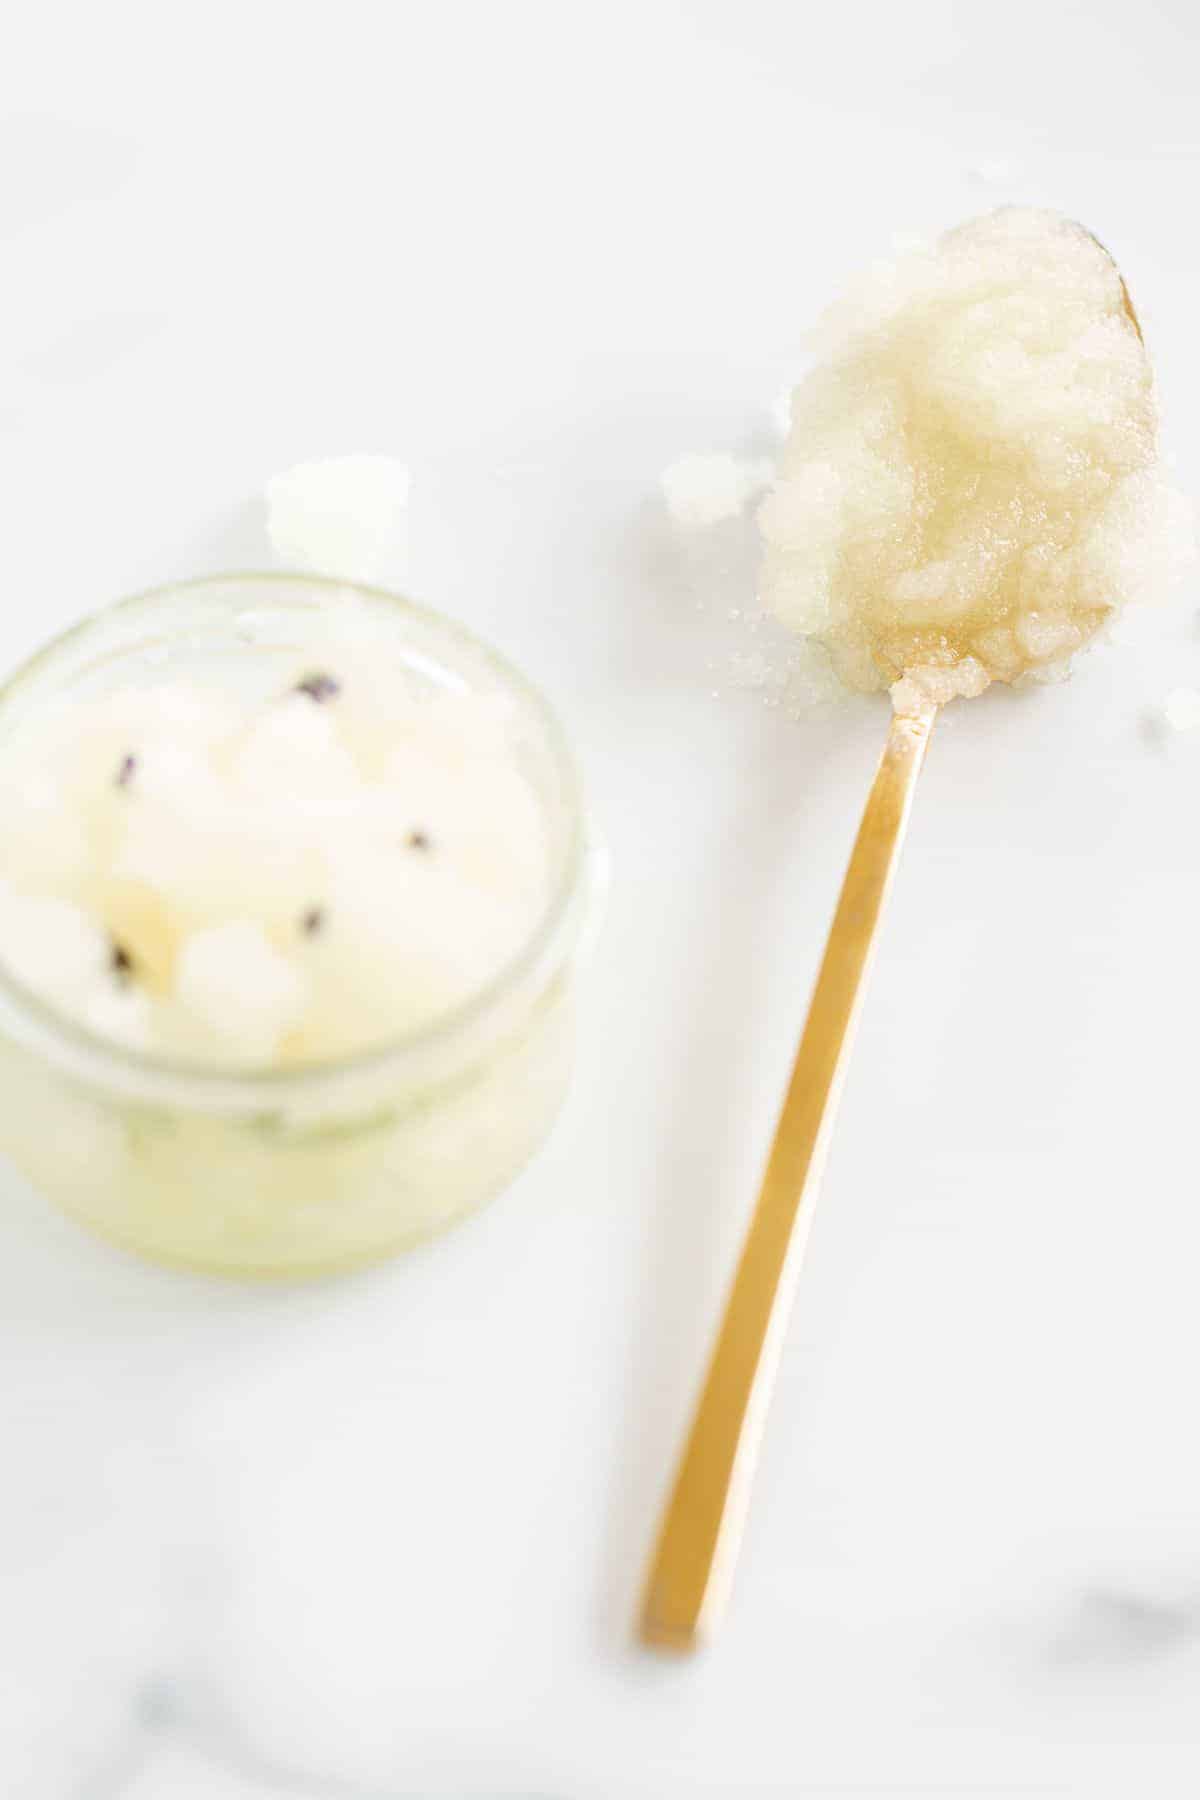 A homemade sugar scrub with lavender, in a glass jar on a white surface, gold spoon to the side.